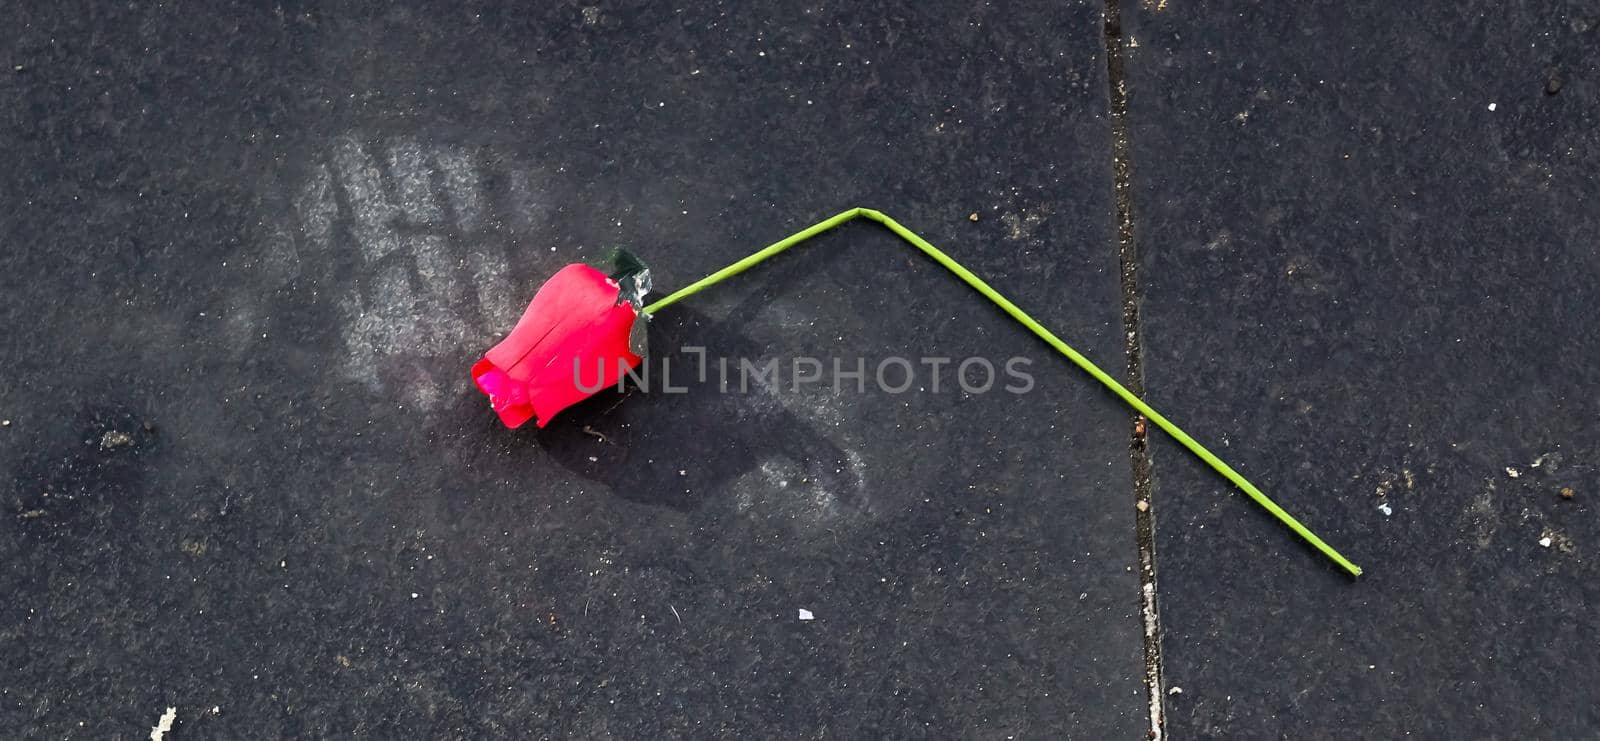 Broken valentine rose lying on a cold stone ground. Valentine concept by MP_foto71